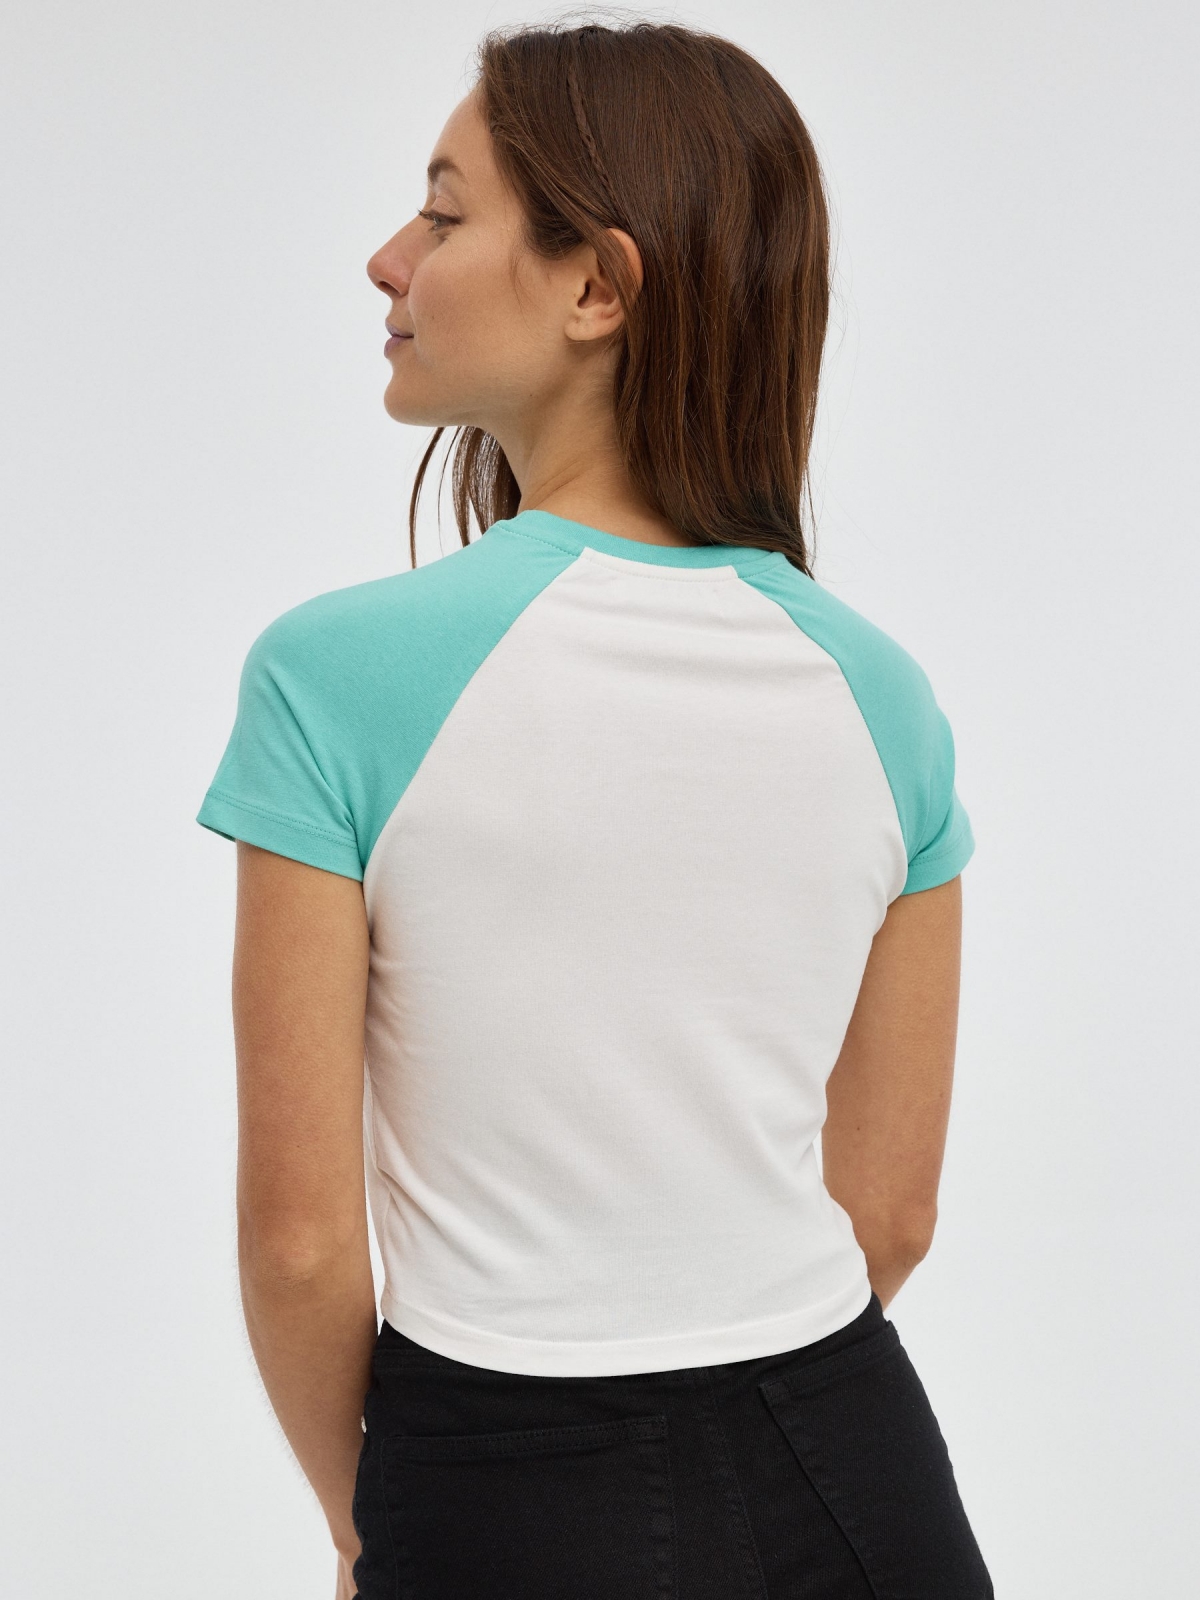 Contrast print t-shirt sea green middle back view